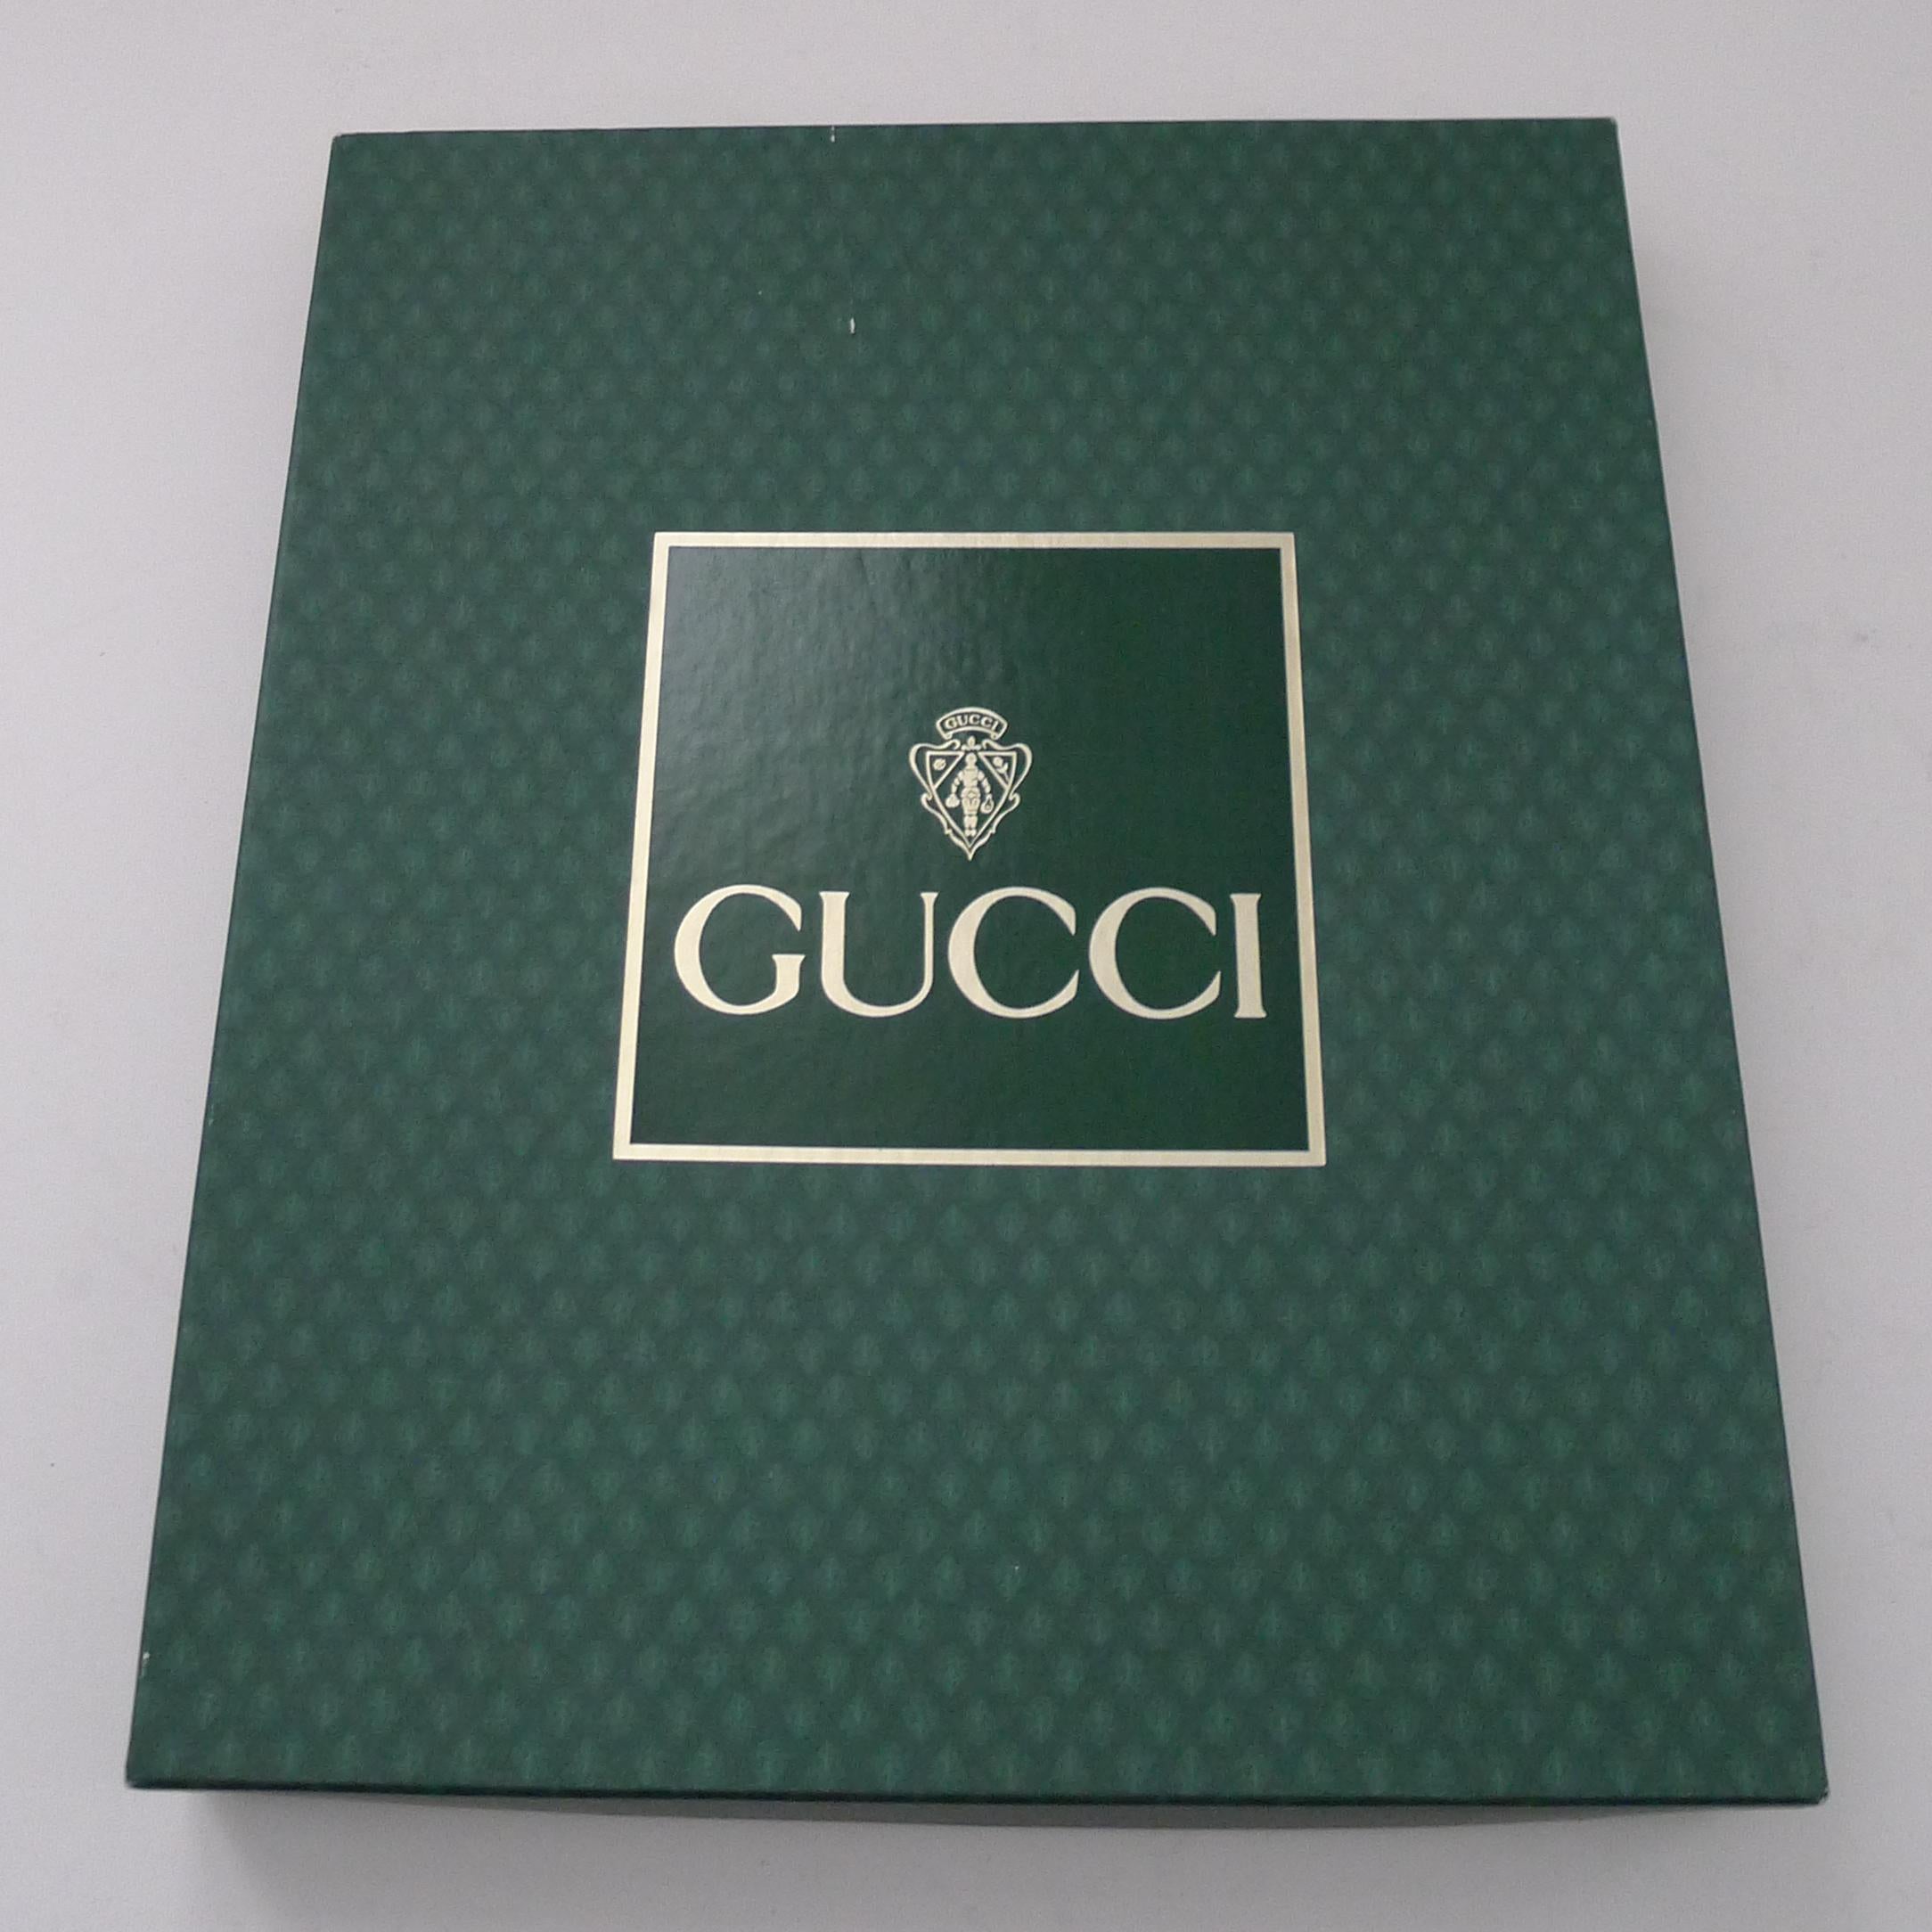 Large Vintage Italian Gucci Picture Frame c.1970 For Sale 14